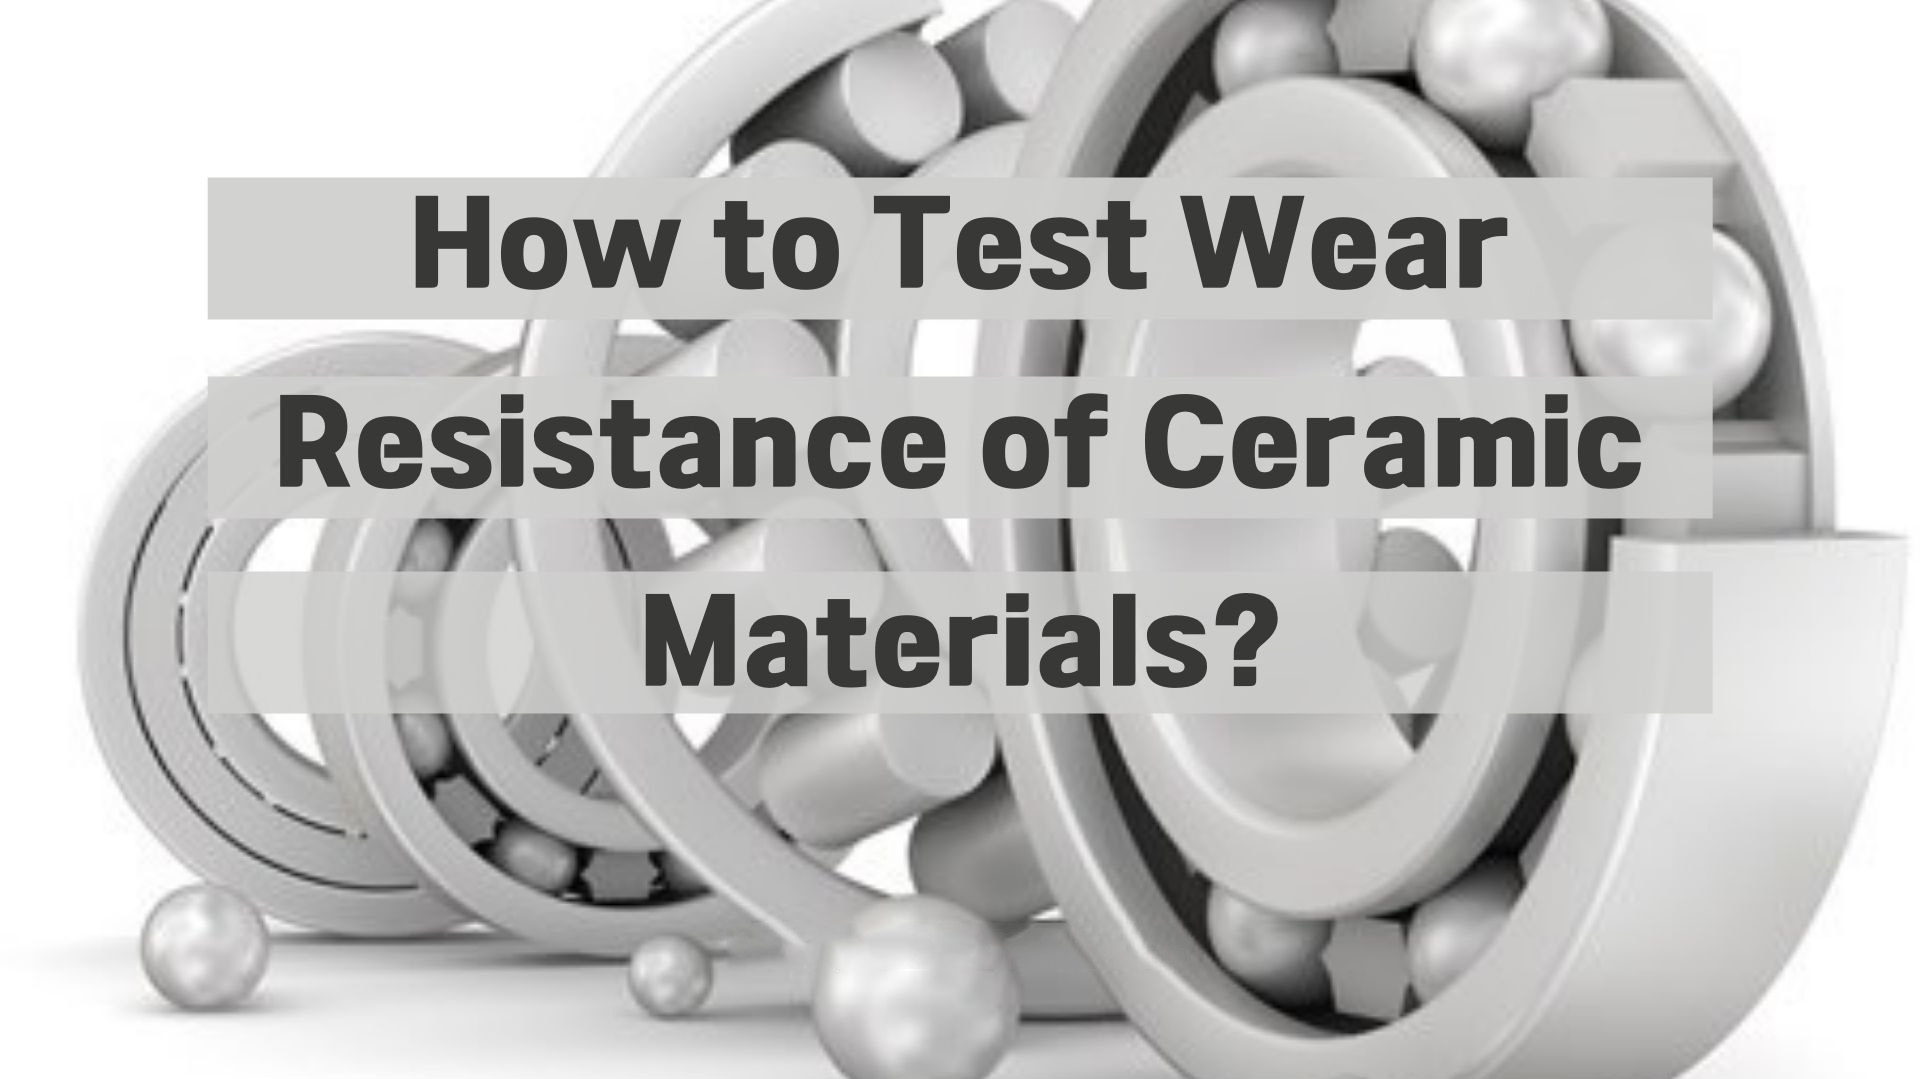 How to Test Wear Resistance of Ceramic Materials